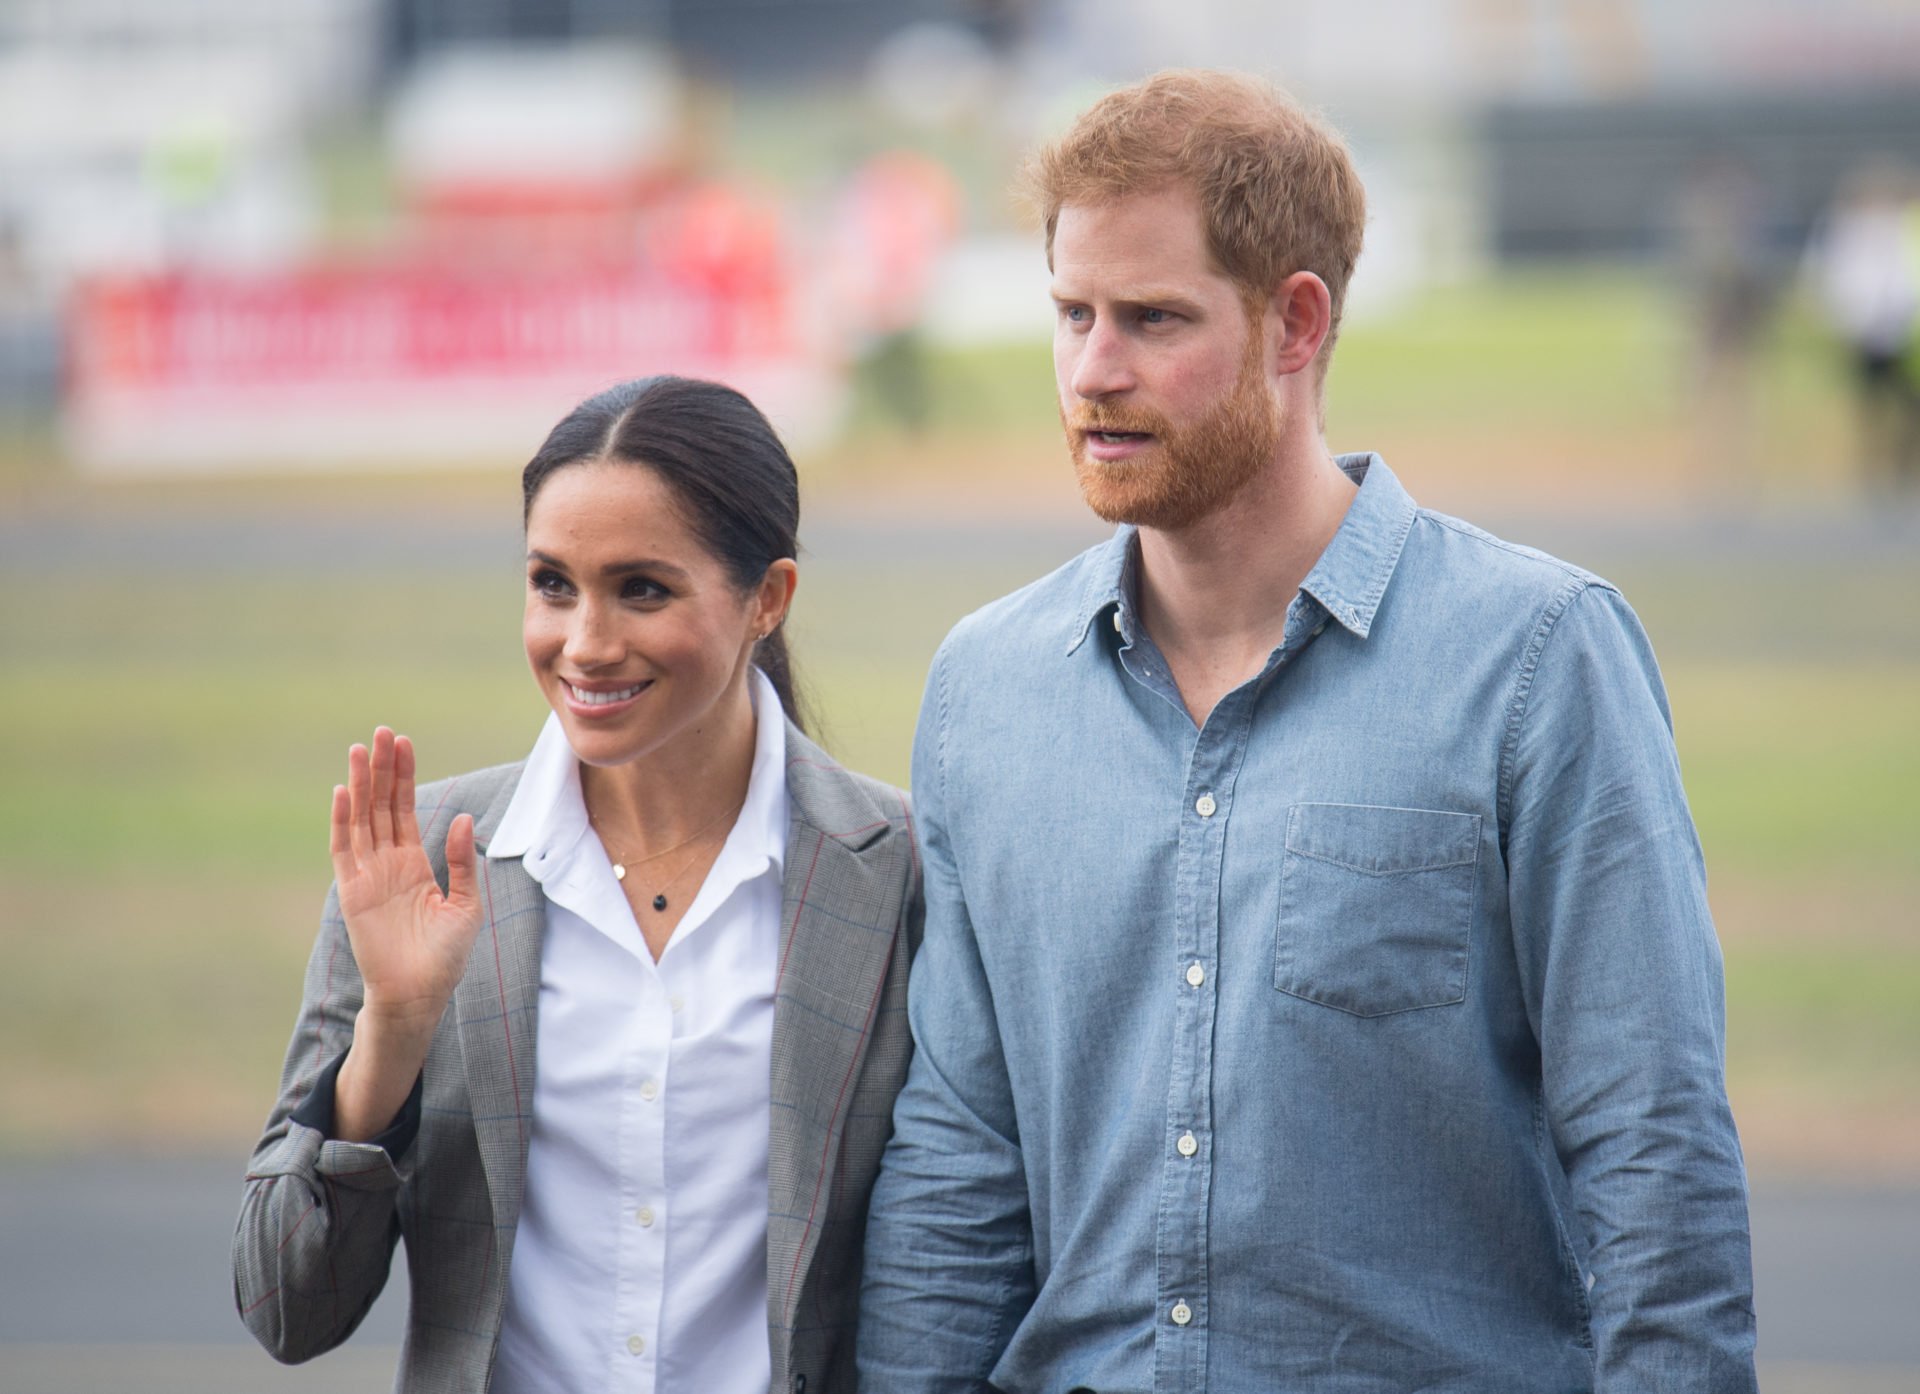 'Dominant' Meghan Markle embraces celebrities but Harry seems 'uncomfortable' - cover